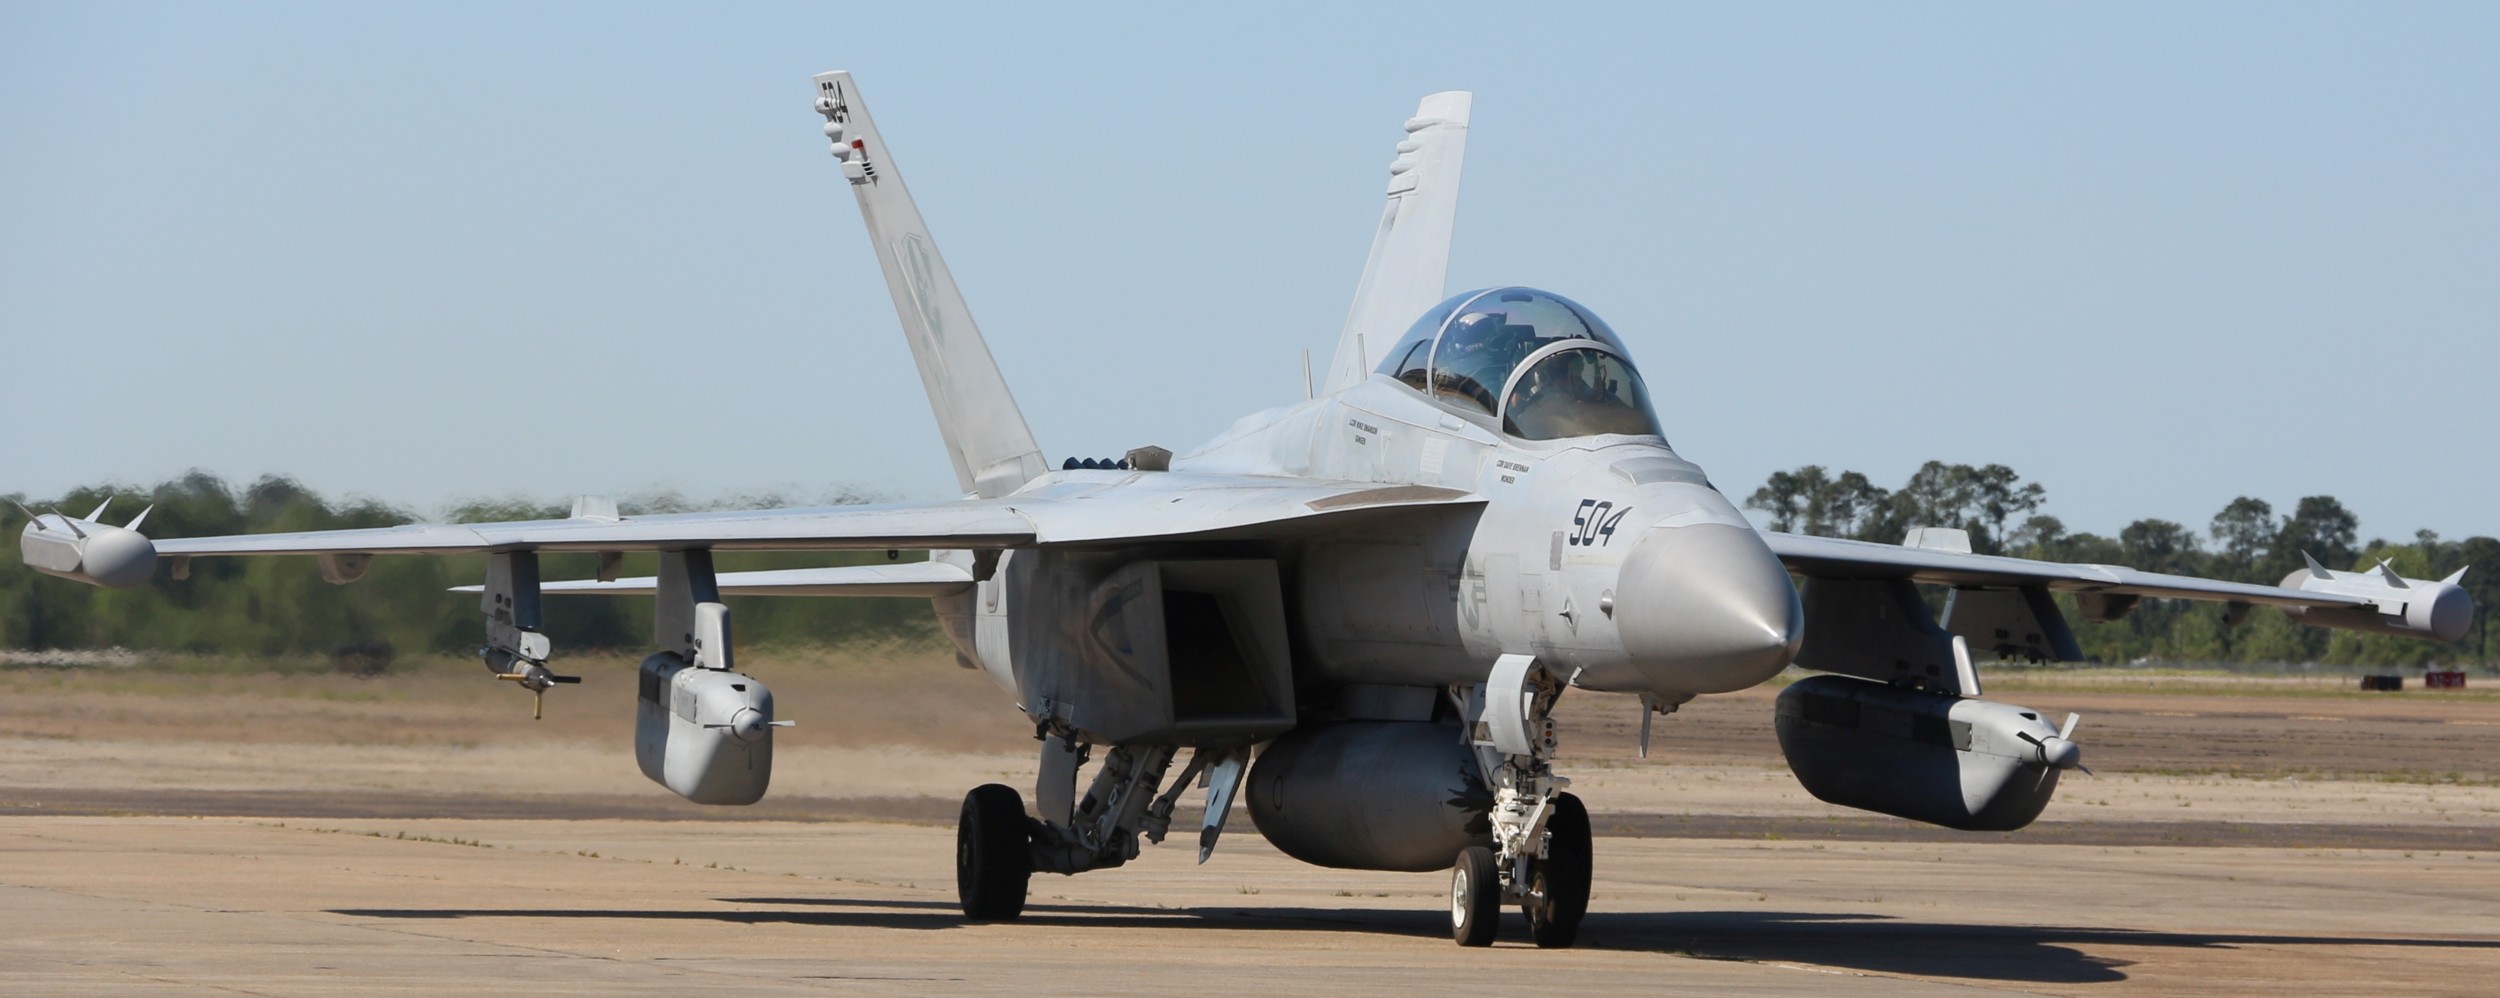 vaq-209 star warriors electronic attack squadron ea-18g growler us navy gulfport crtc mississippi 74